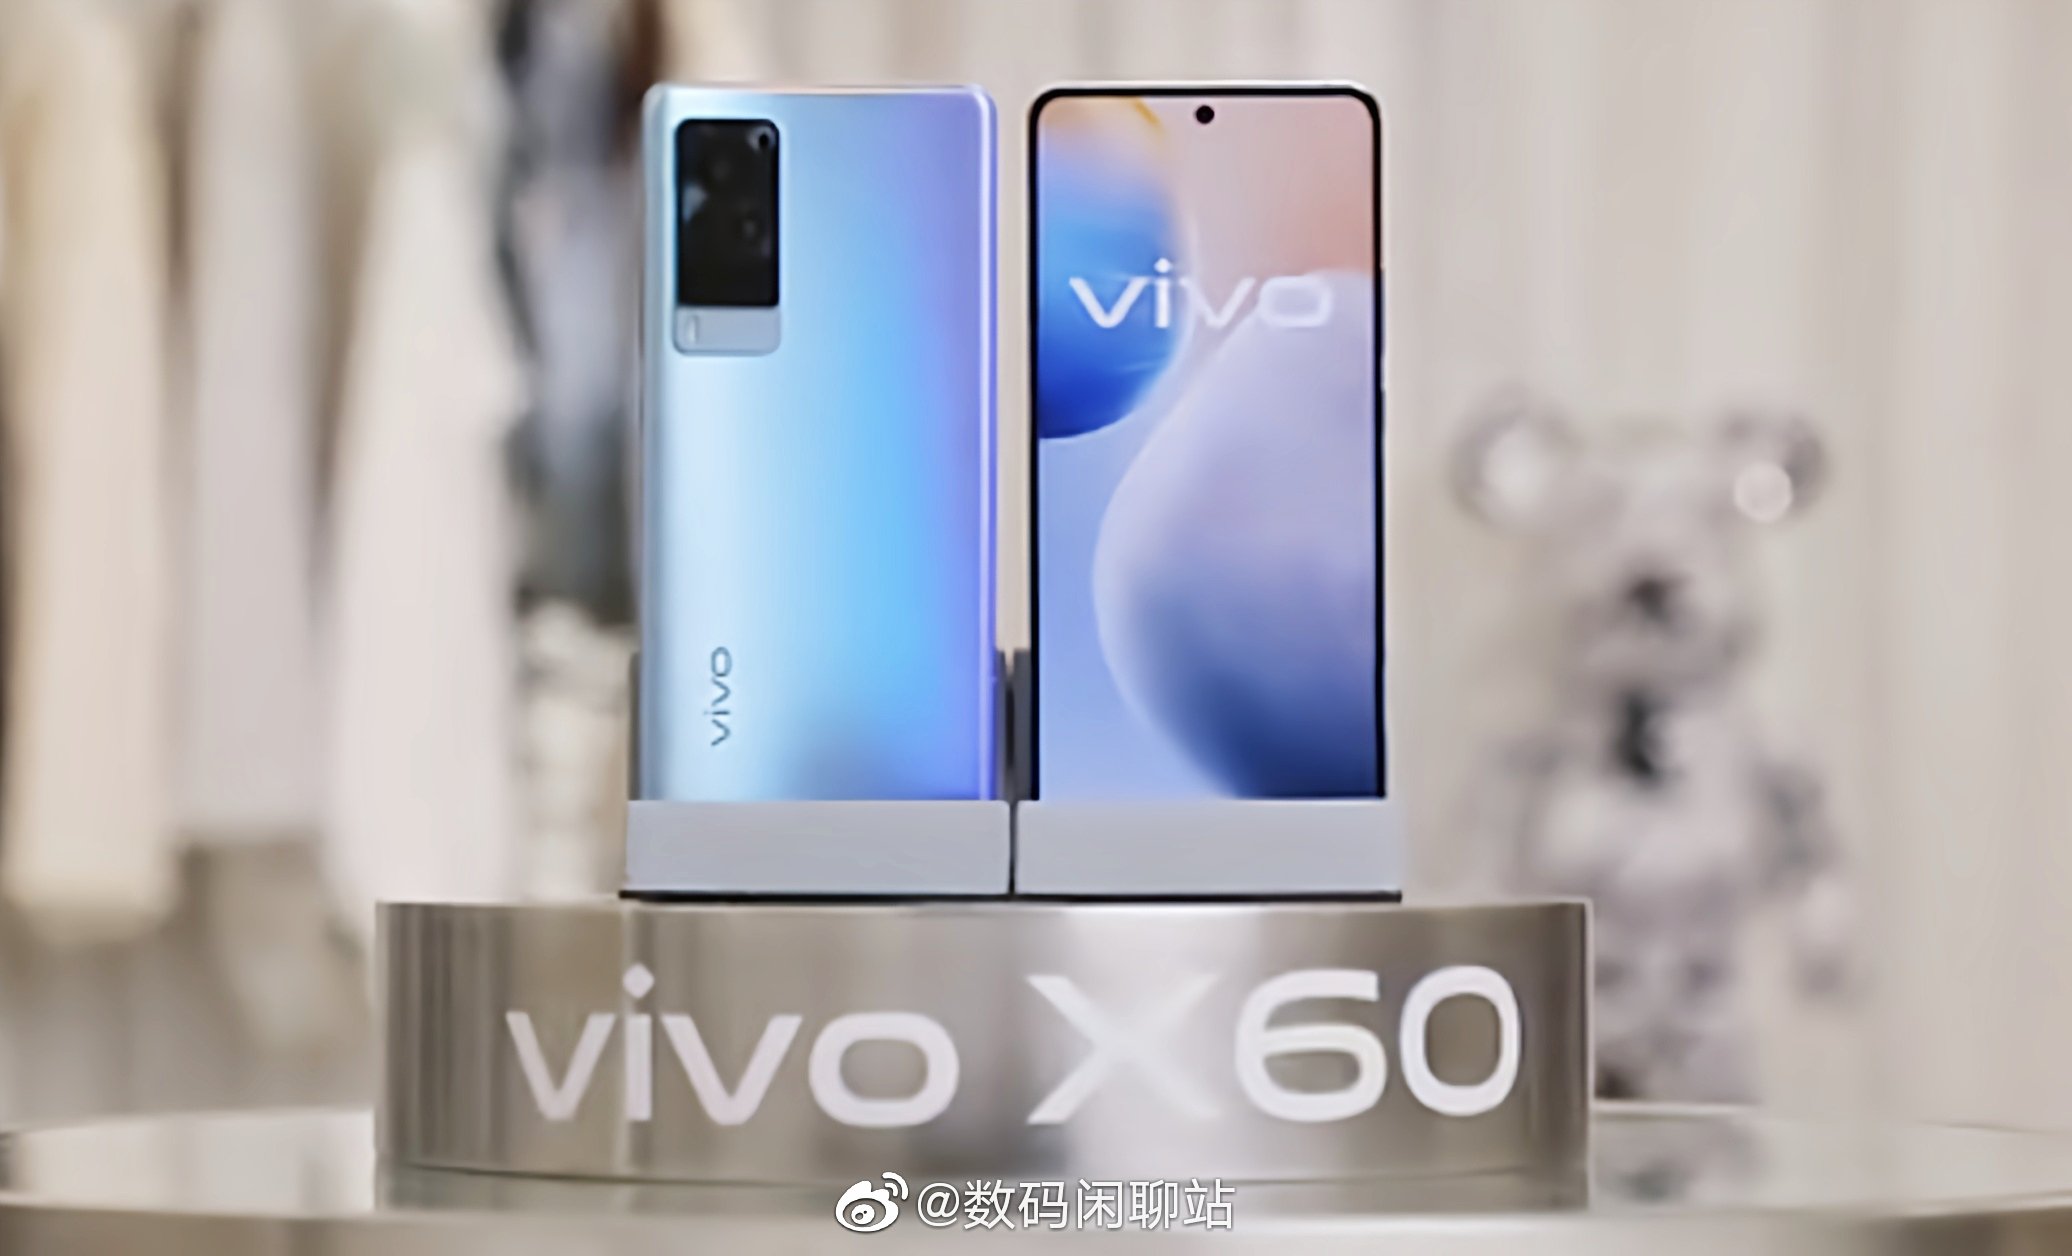 Vivo X60 series may get announced on December 28